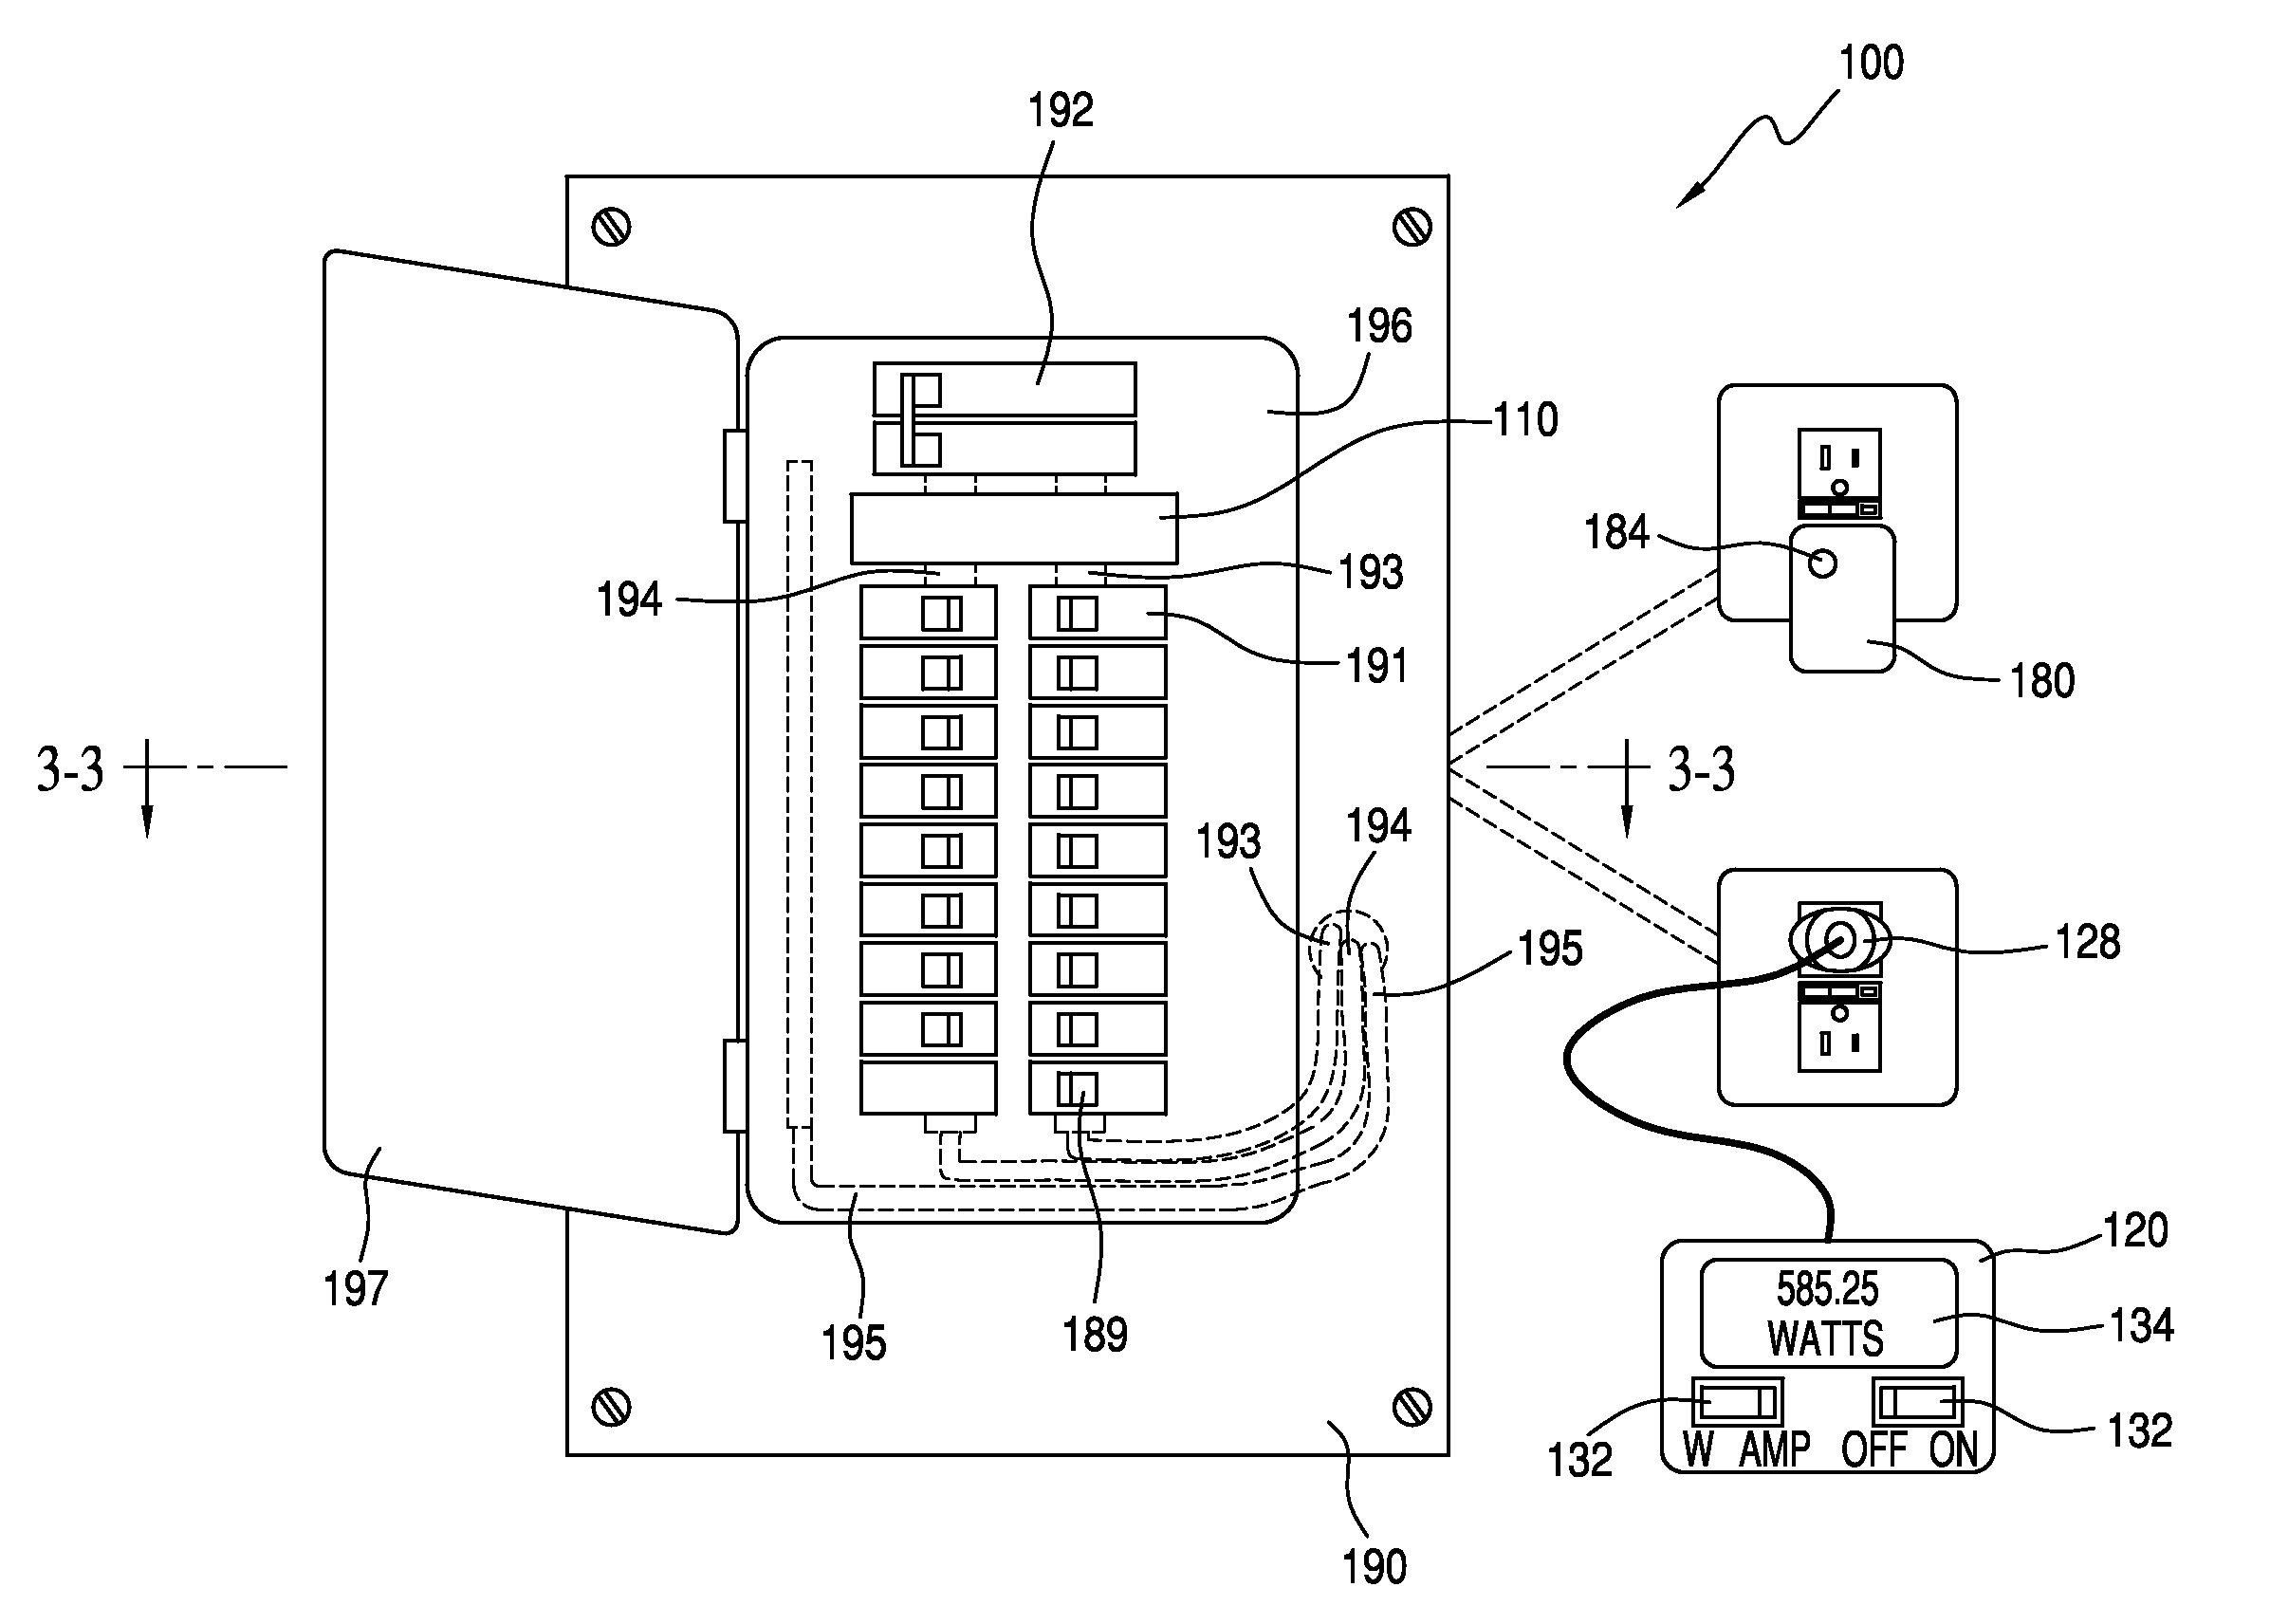 Systems and methods for measuring electrical power usage in a structure and systems and methods of calibrating the same